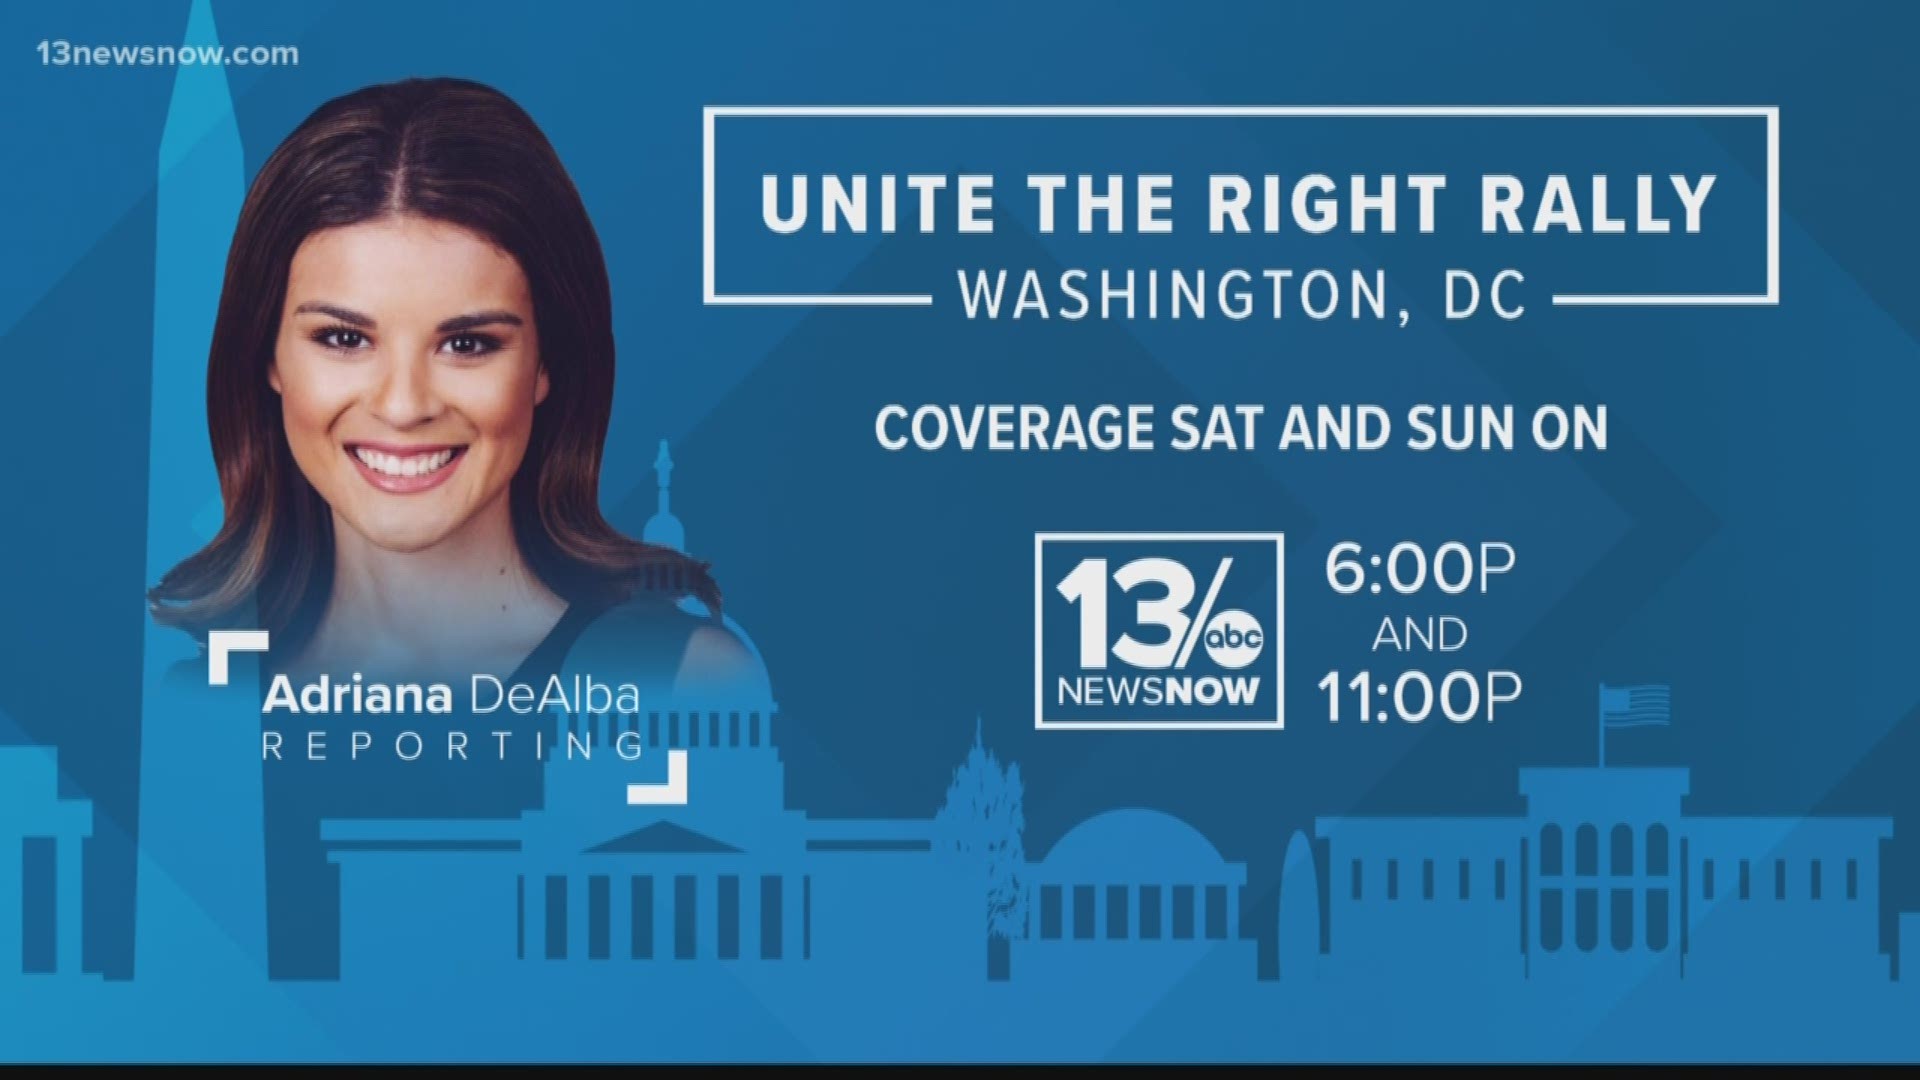 Adriana DeAlba reports on the Unite the Right Rally in Washington D.C. on Sunday, Aug. 12.